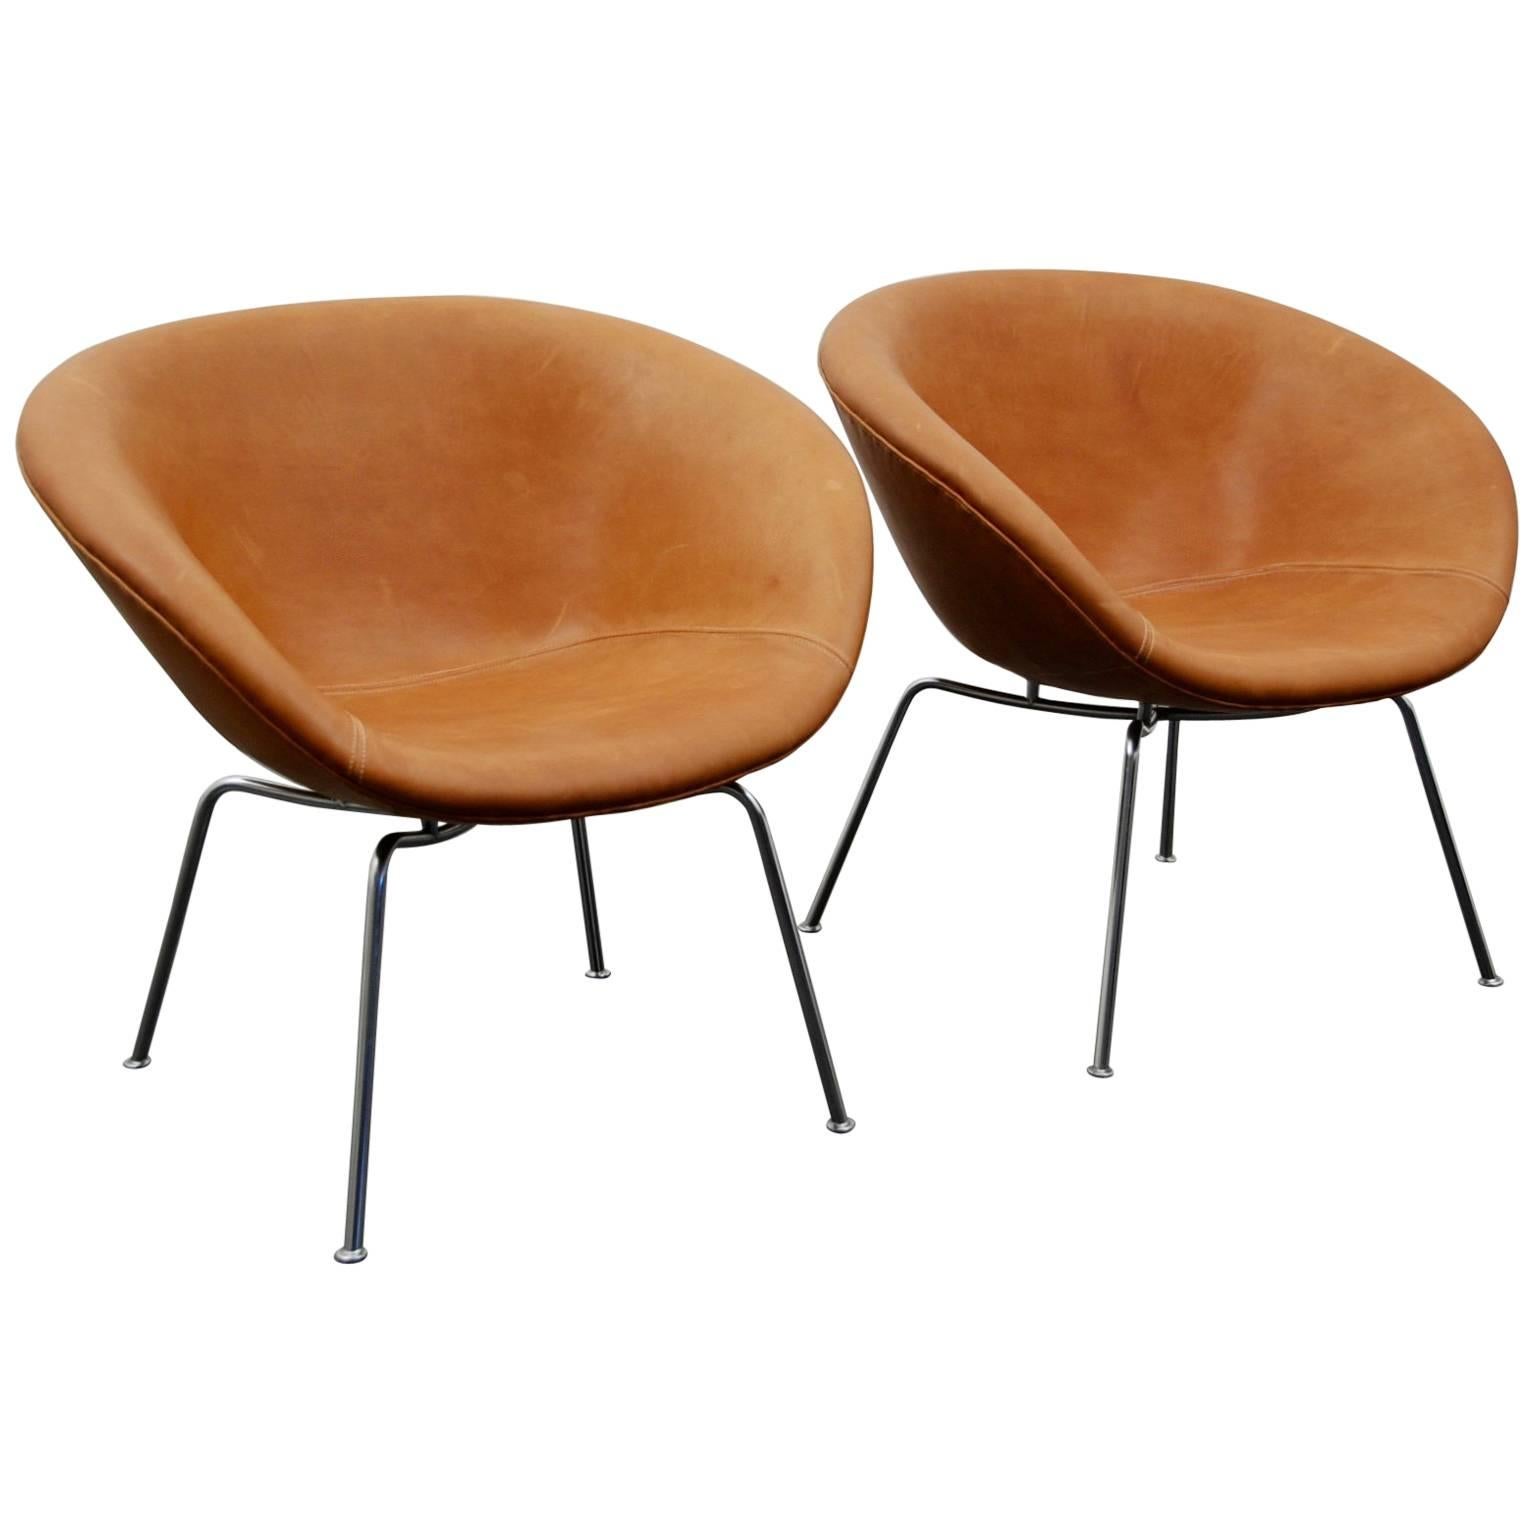 Arne Jacobsen Pair of "Pot Chair" For Sale